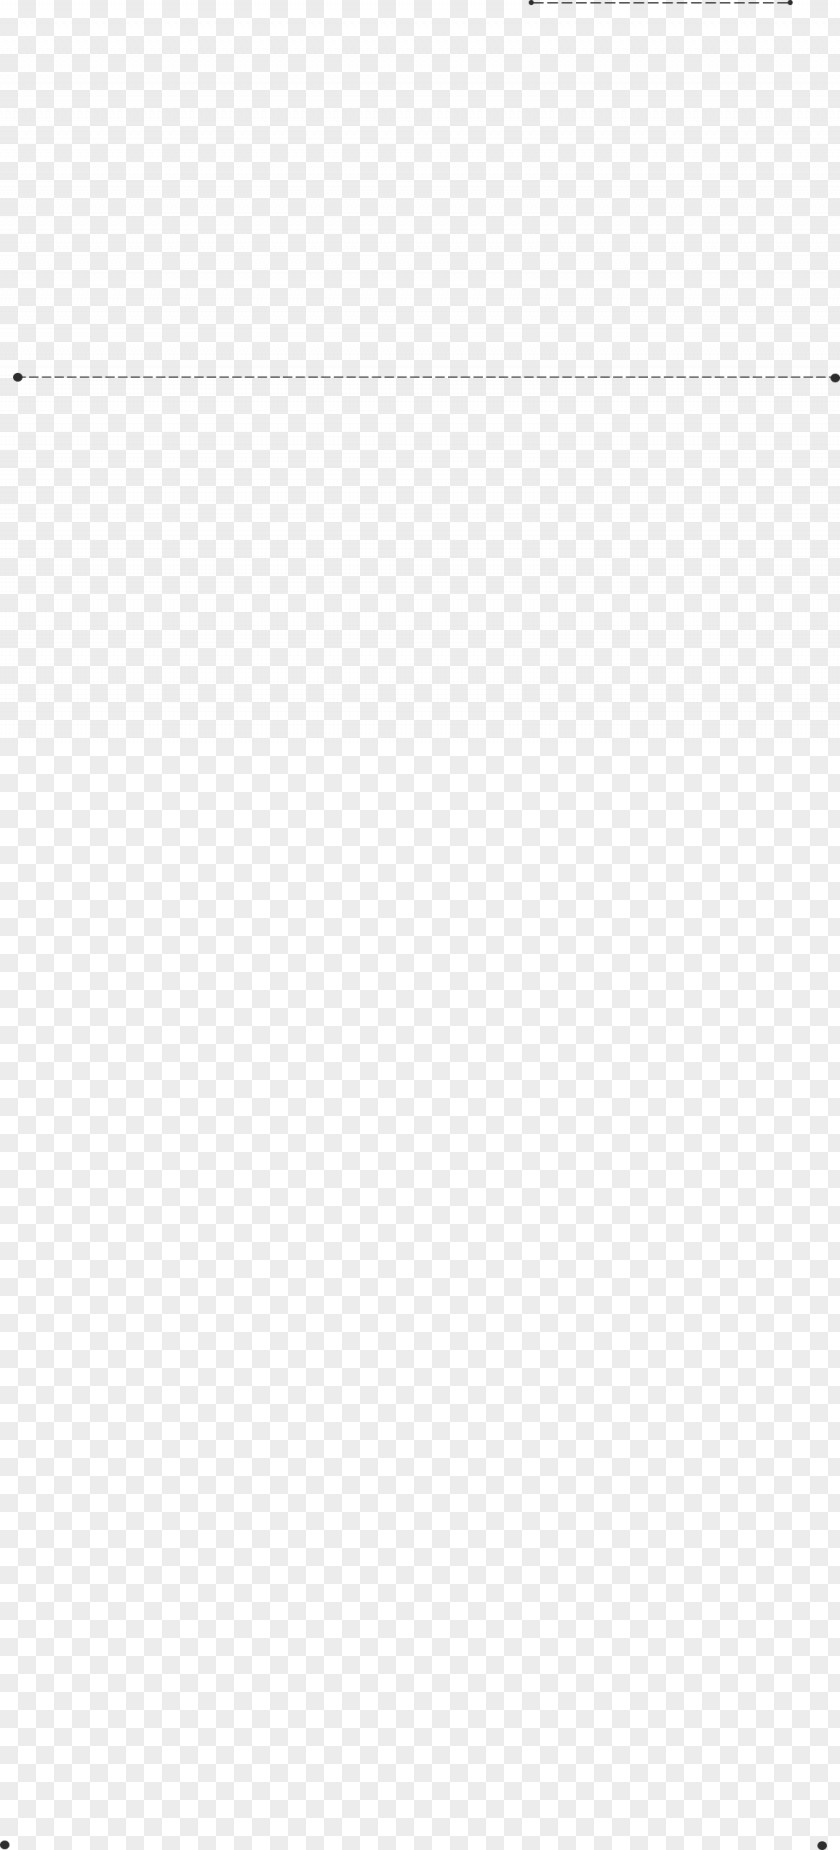 Dotted Line Black White Border PNG